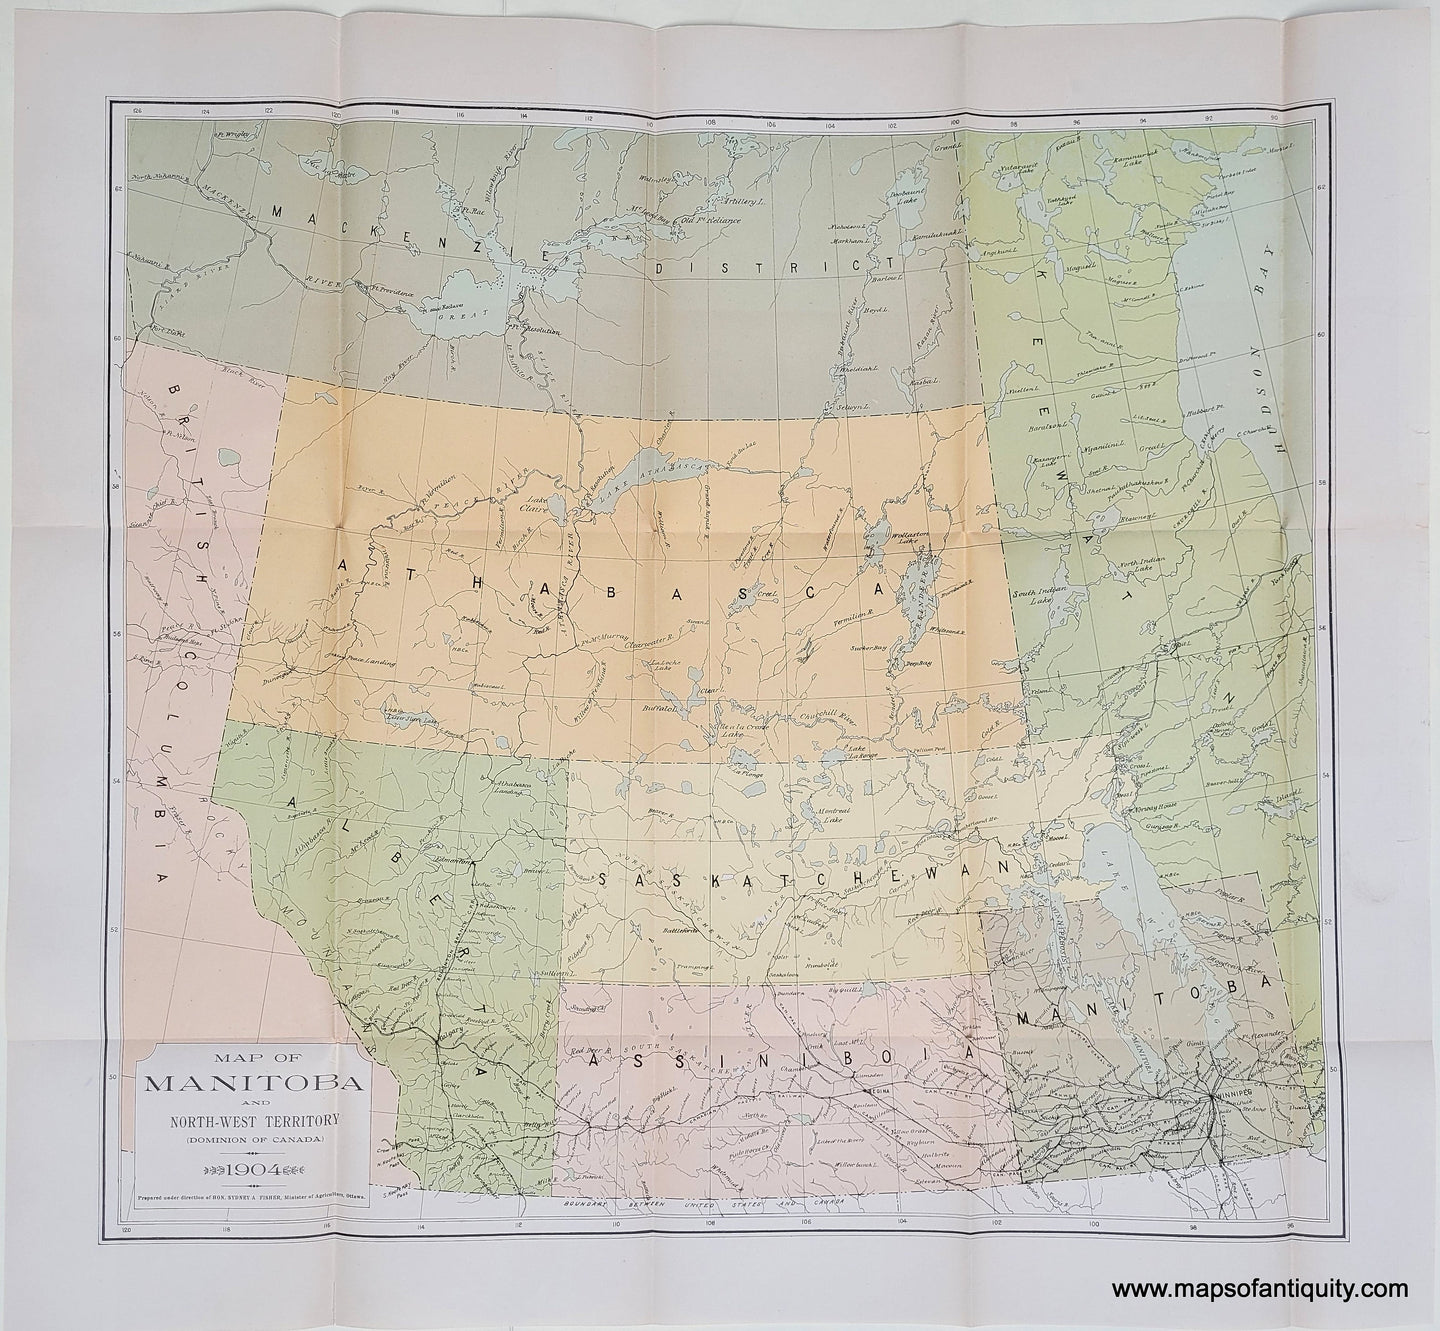 Genuine-Antique-Map-Map-of-Manitoba-and-North-West-Territory-Dominion-of-Canada-1904-Department-of-Agriculture-Maps-Of-Antiquity